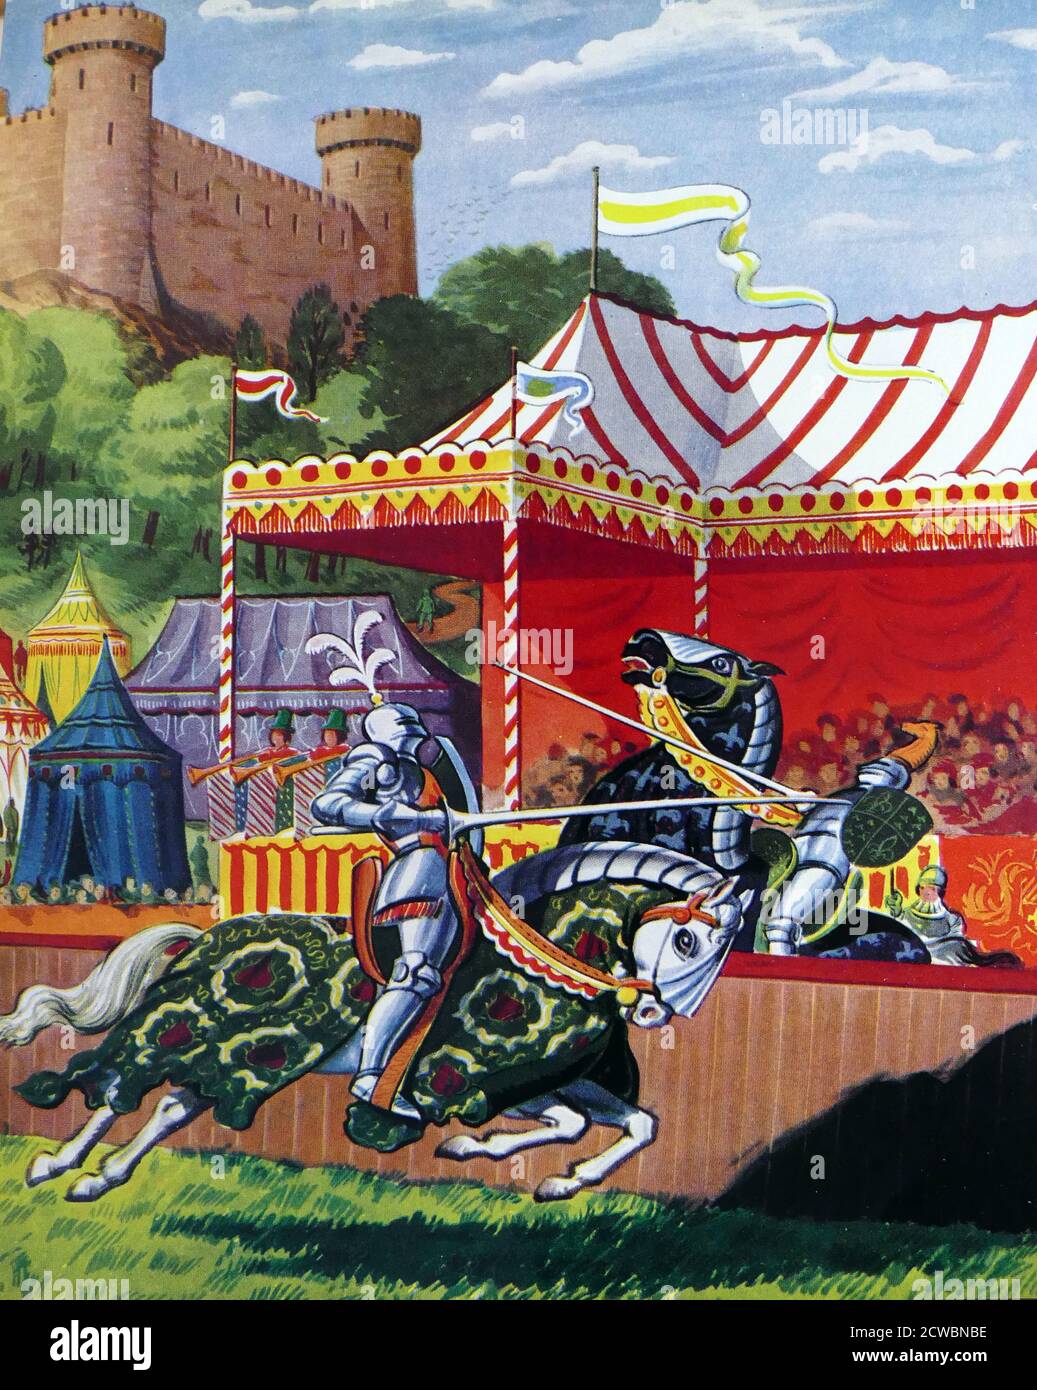 Illustration depicting medieval English jousting, a martial game or hastilude between two horsemen wielding lances with blunted tips, often as part of a tournament. The primary aim was to replicate a clash of heavy cavalry, with each participant trying hard to strike the opponent while riding towards him at high speed, breaking the lance on the opponent's shield or jousting armour if possible, or unhorsing him Stock Photo